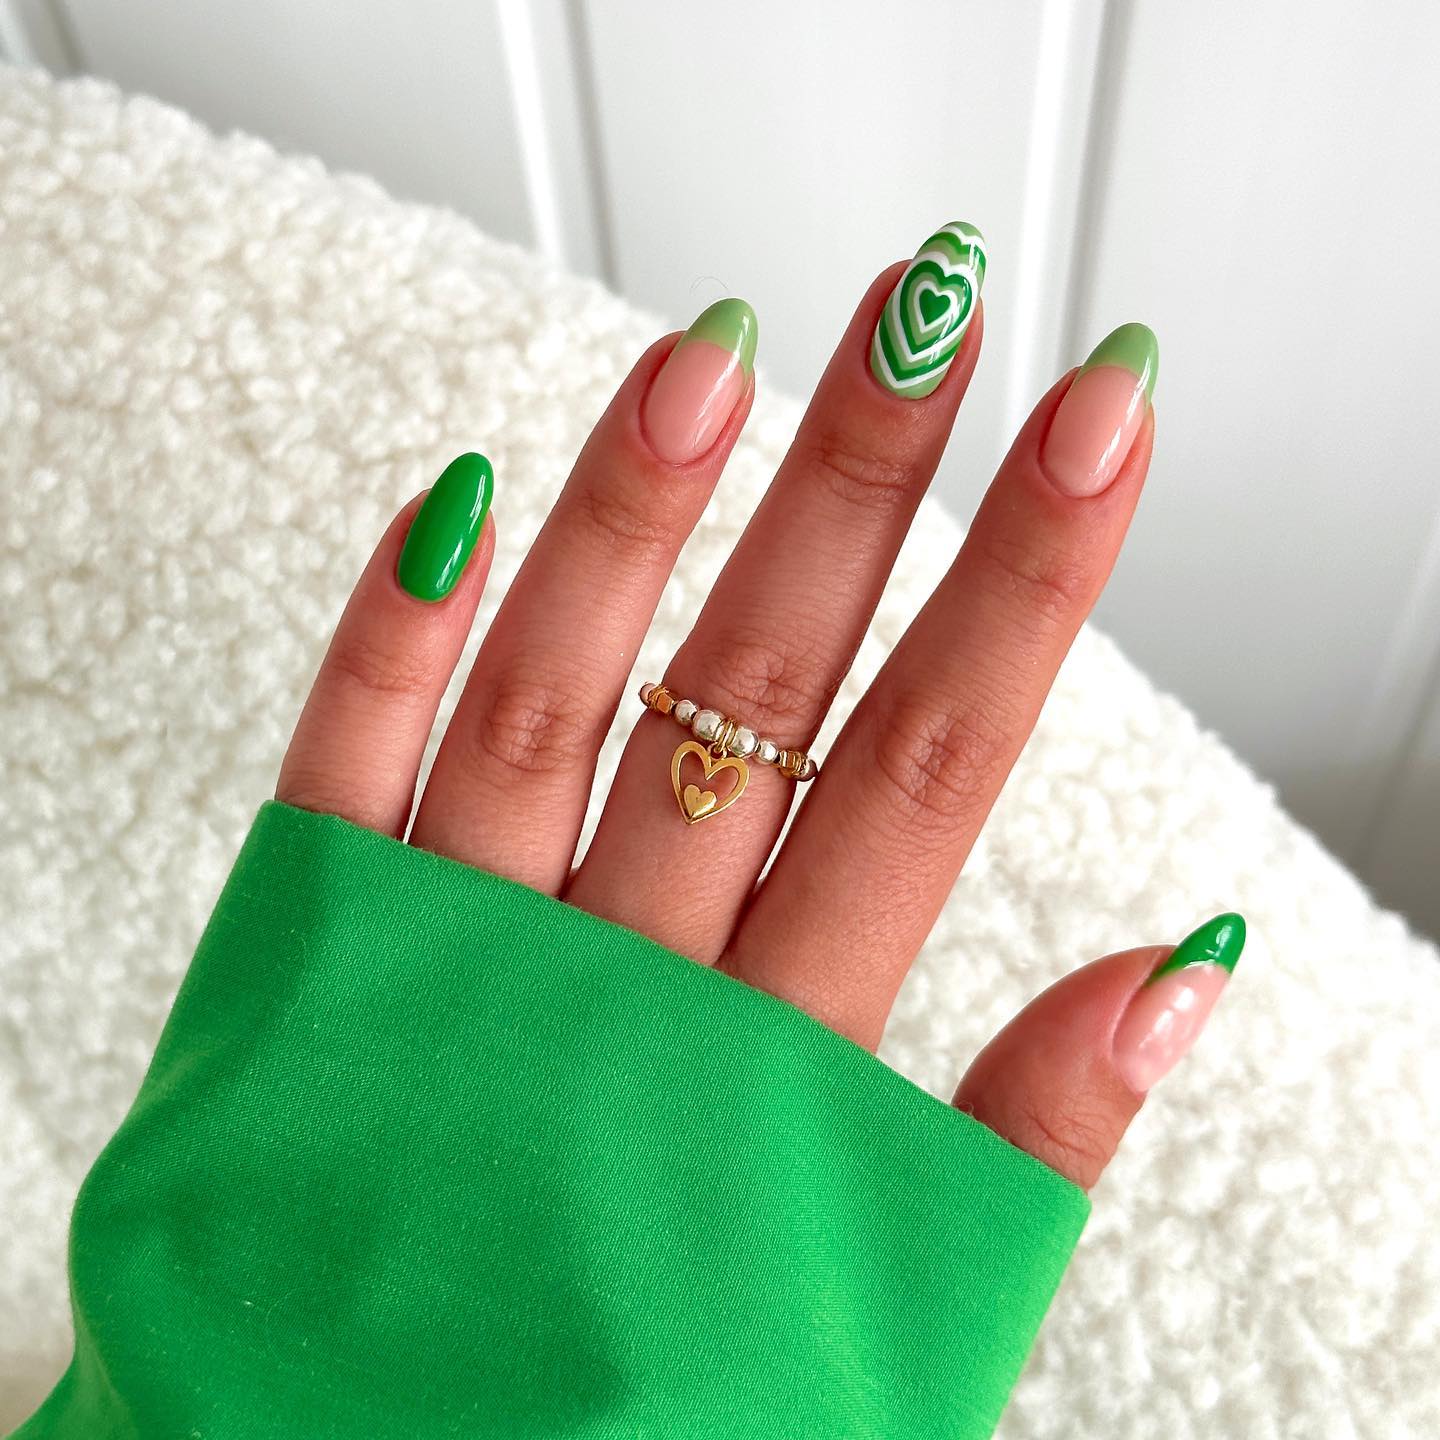 14 Dazzling Blue and Green Nail Designs To Try - The Nails Nation